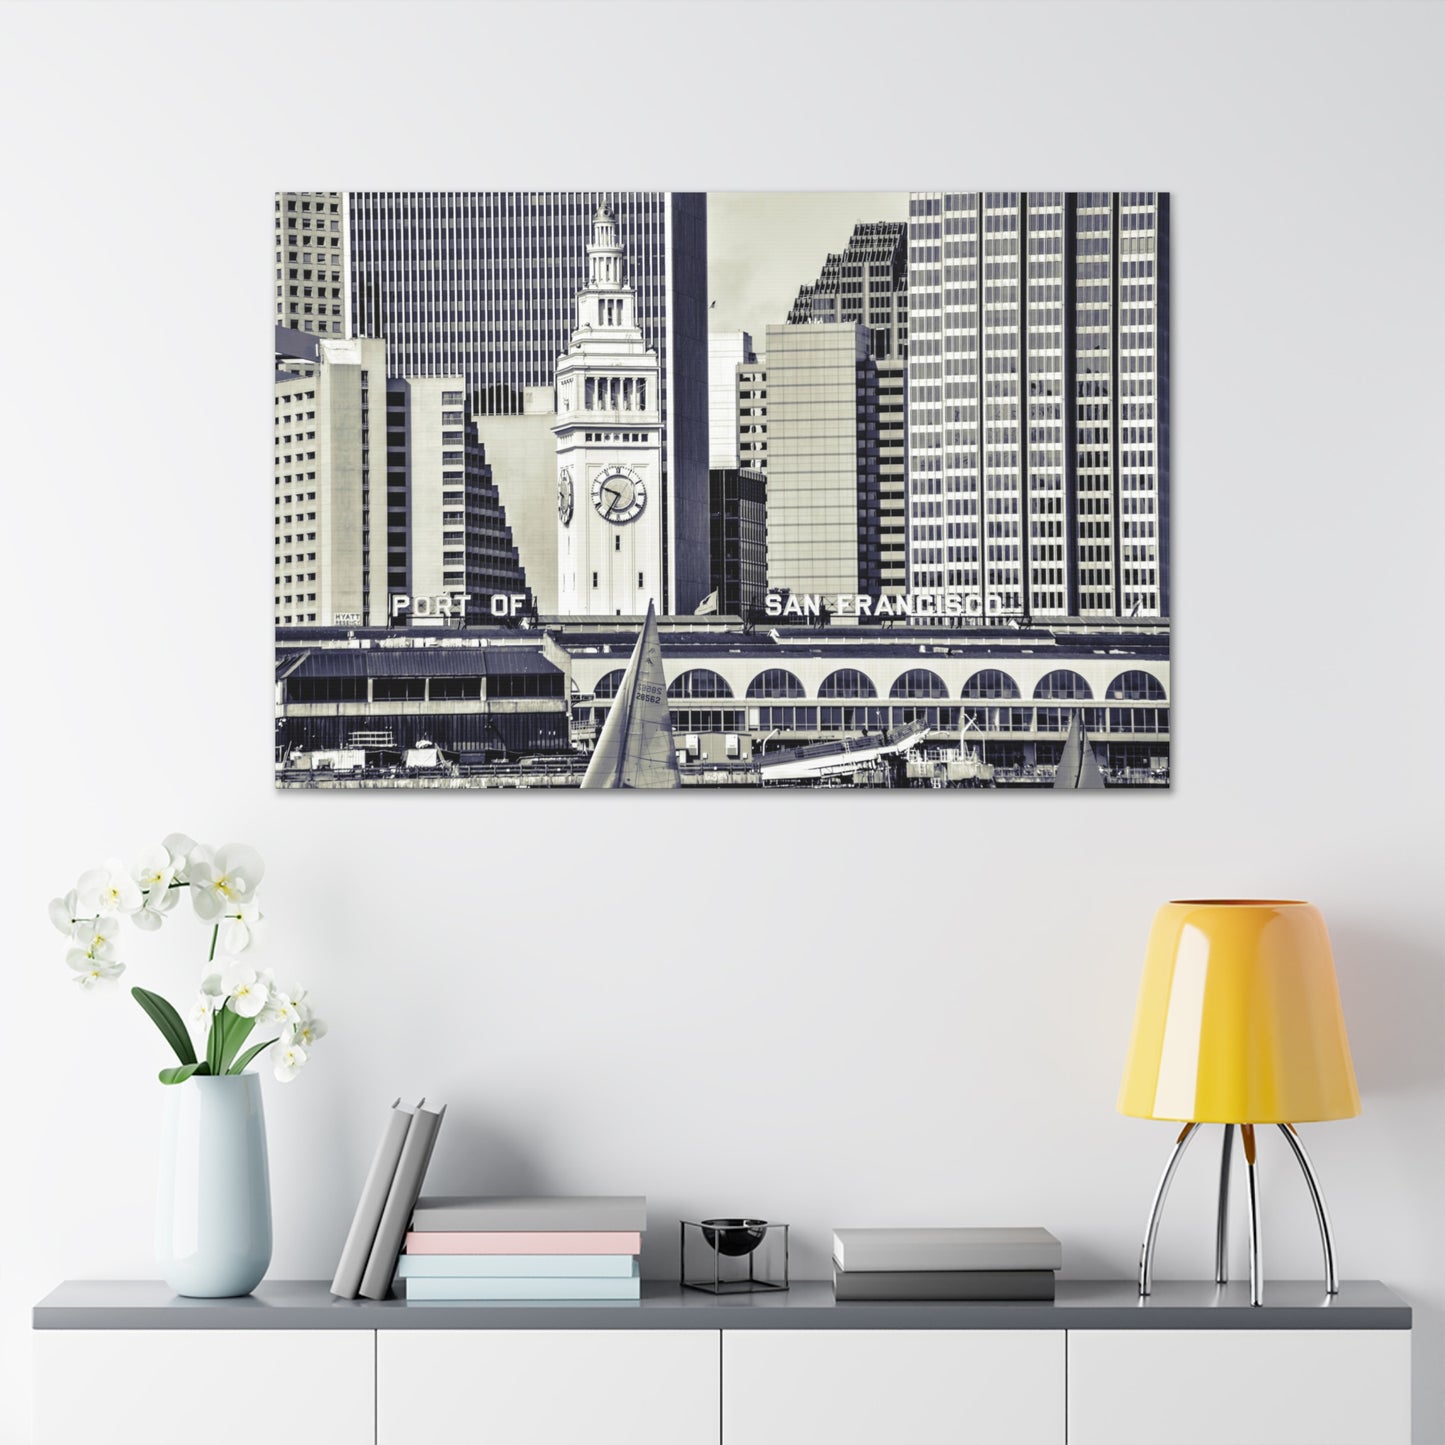 Canvas Print Of Sailboats And The Ferry Building And San Francisco For Wall Art